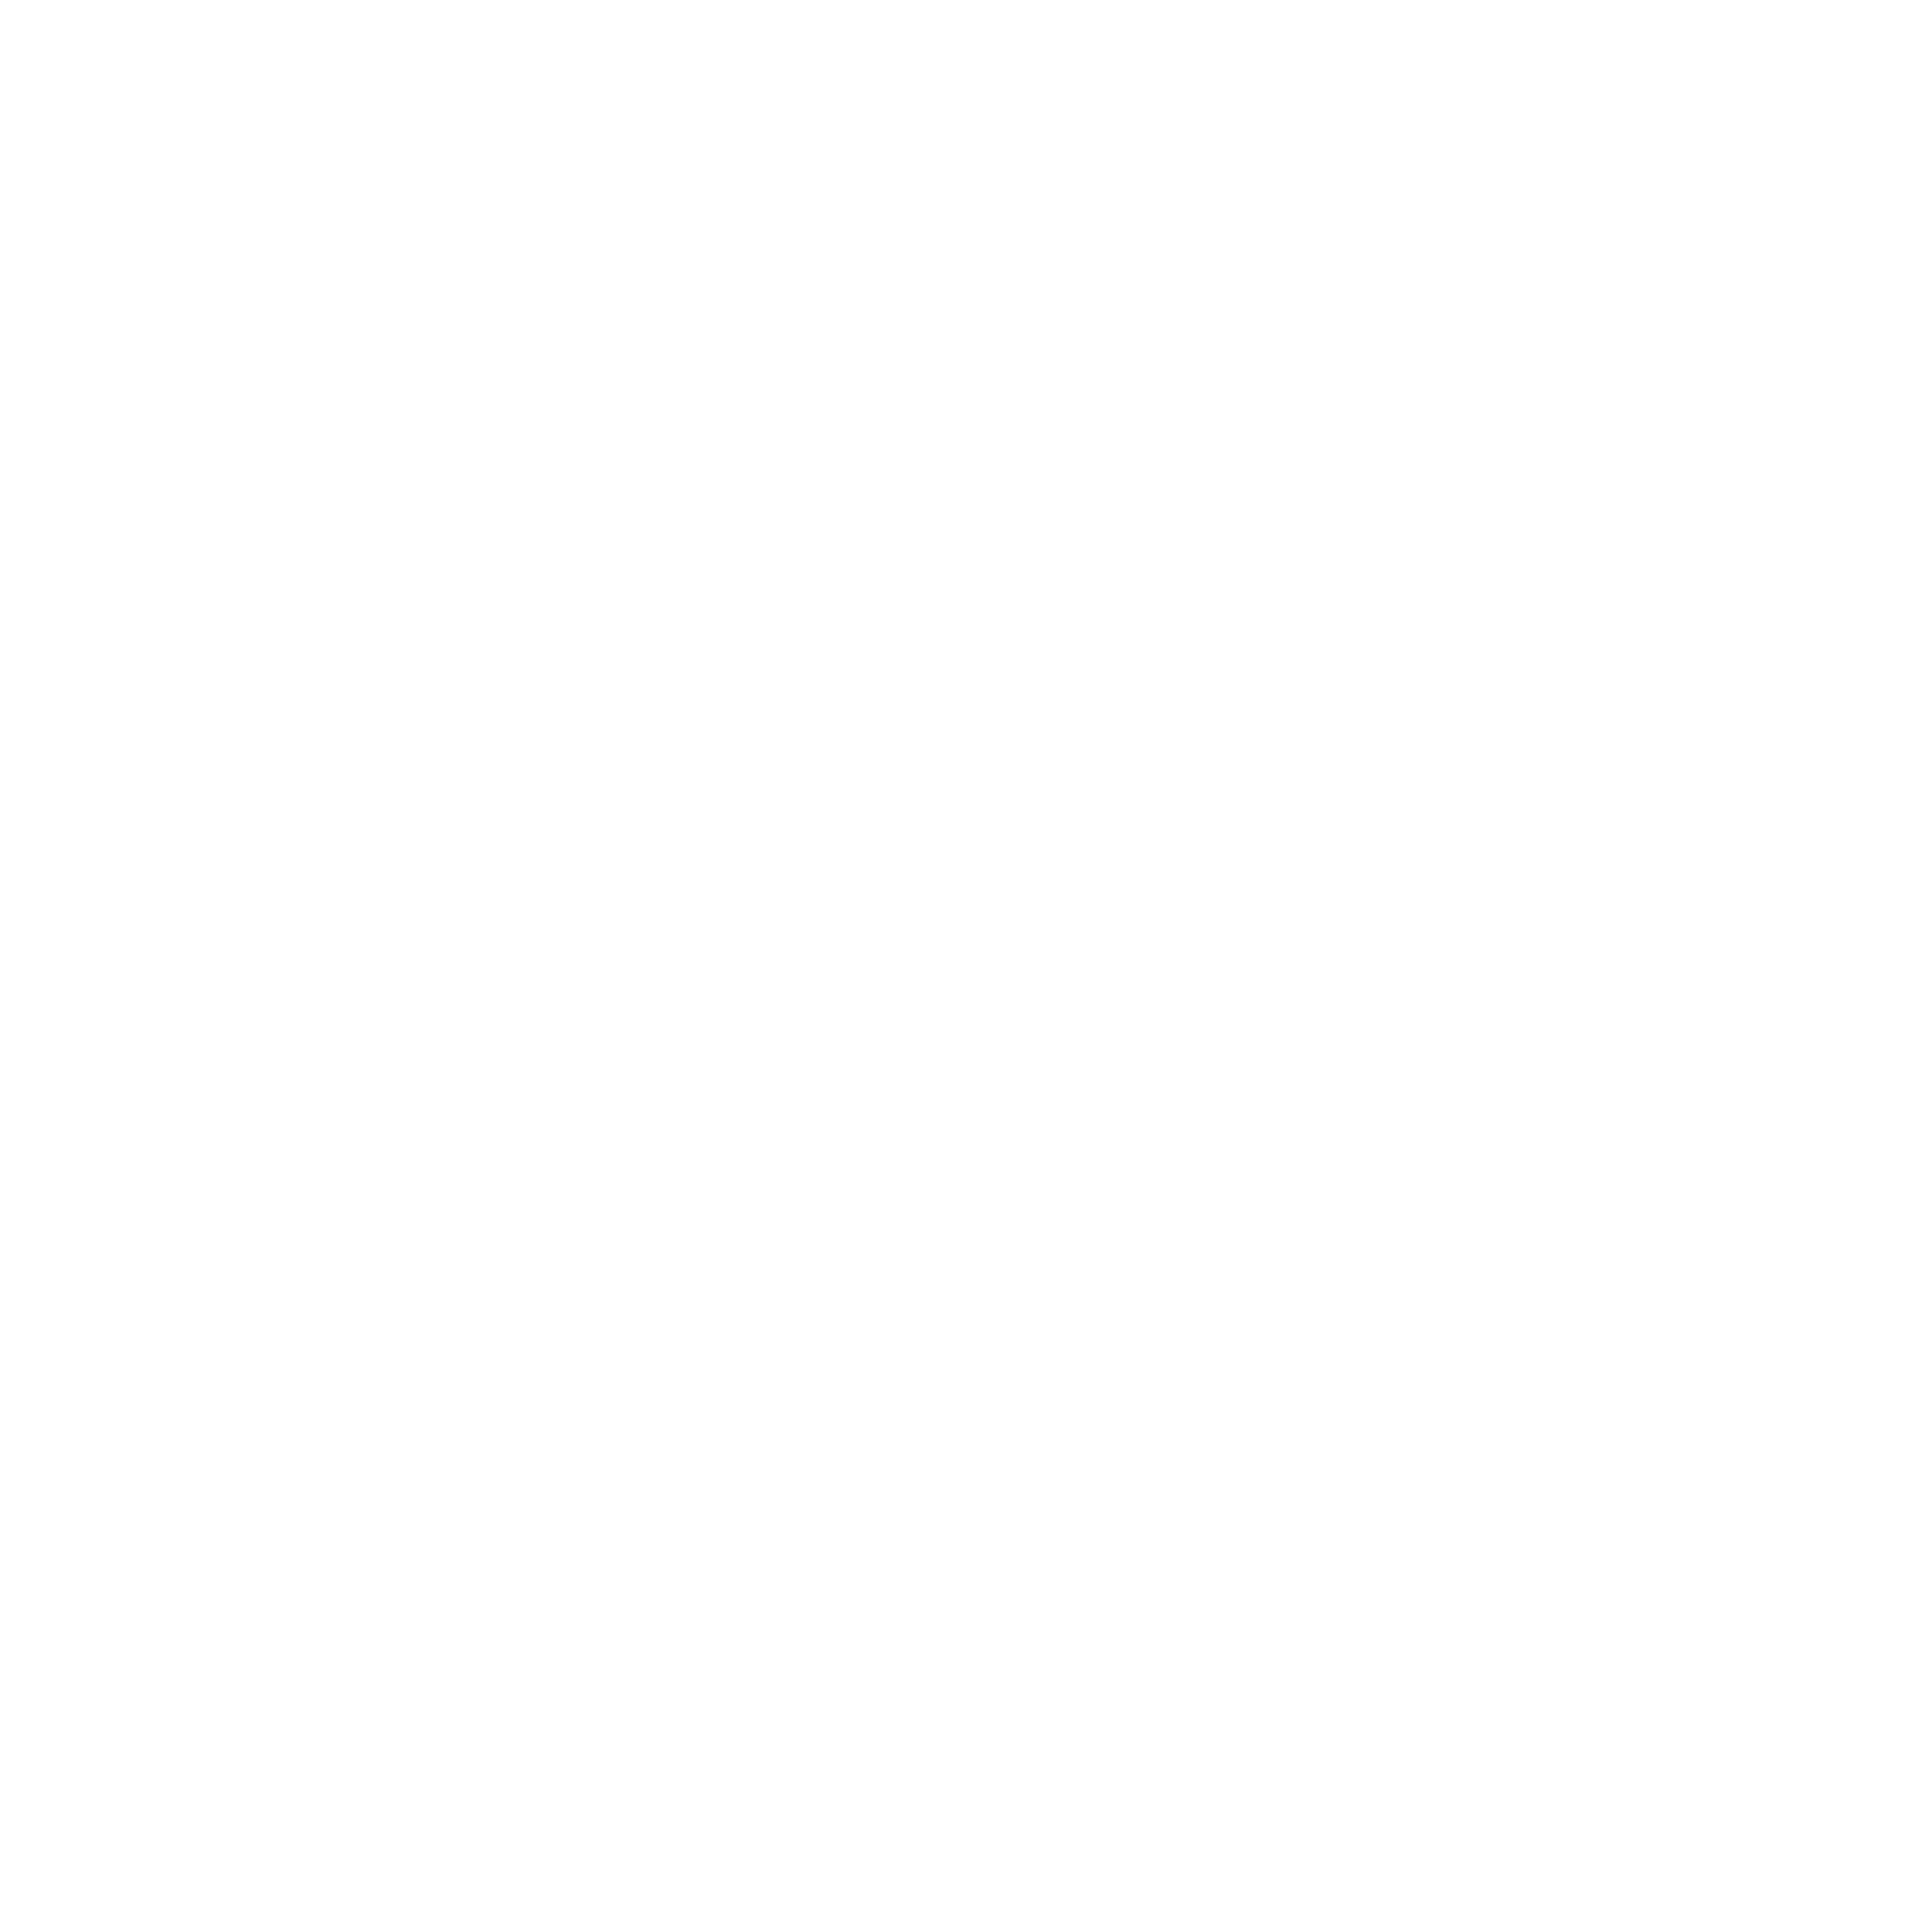 Inaugural Web 5.0 Conference Saw Encouraging Attendance and Strengthened Marvion's Presence in Singapore